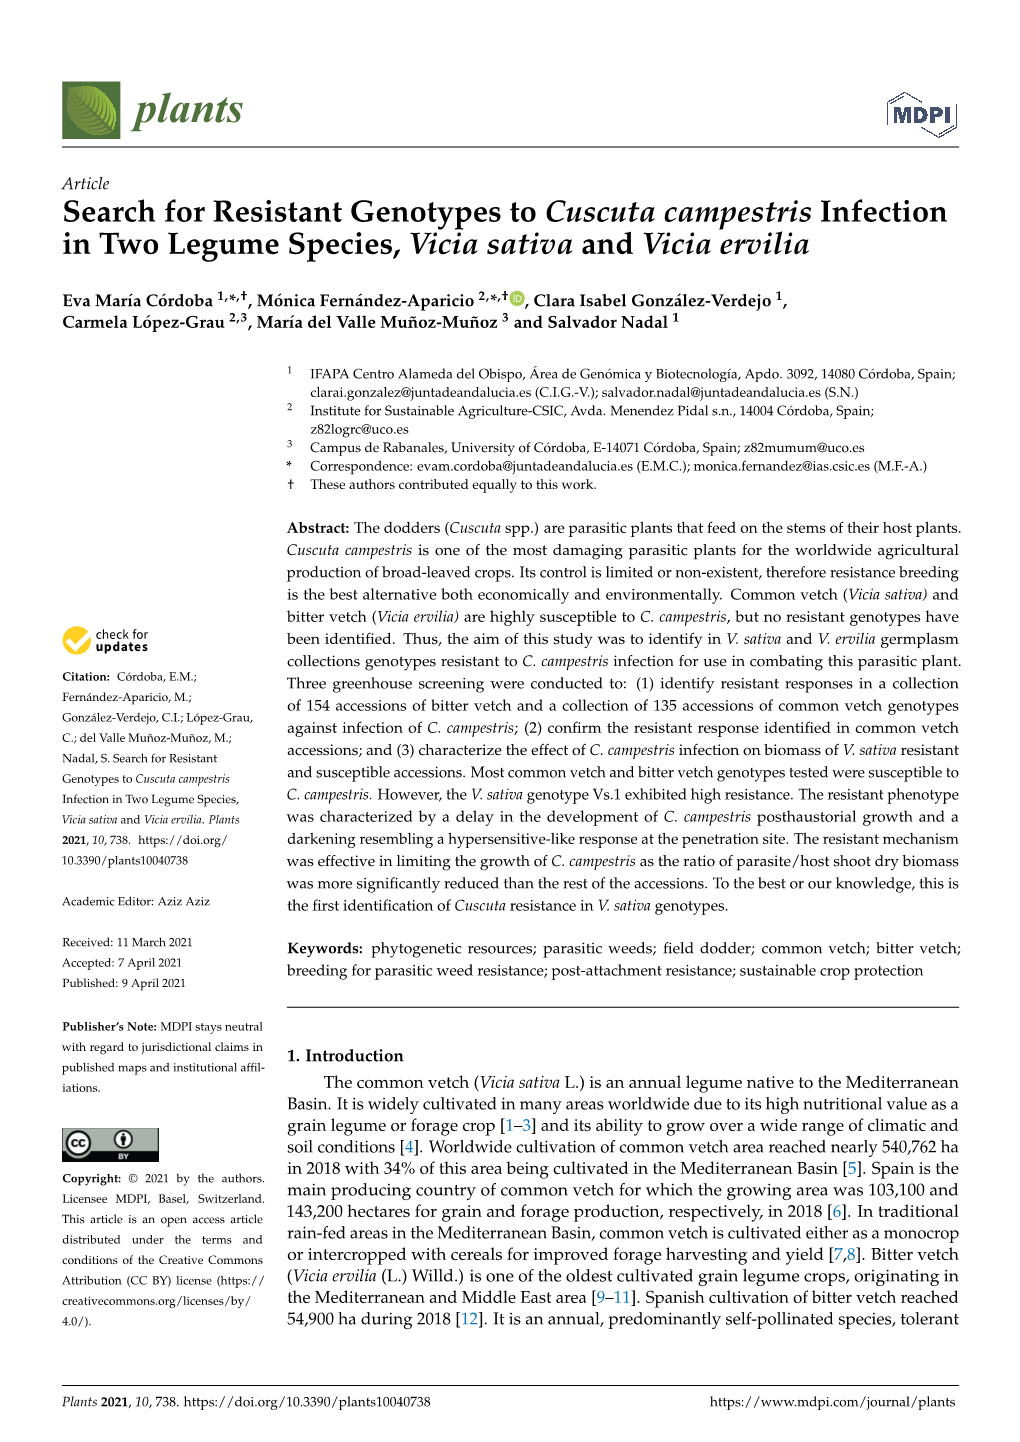 Search for Resistant Genotypes to Cuscuta Campestris Infection in Two Legume Species, Vicia Sativa and Vicia Ervilia